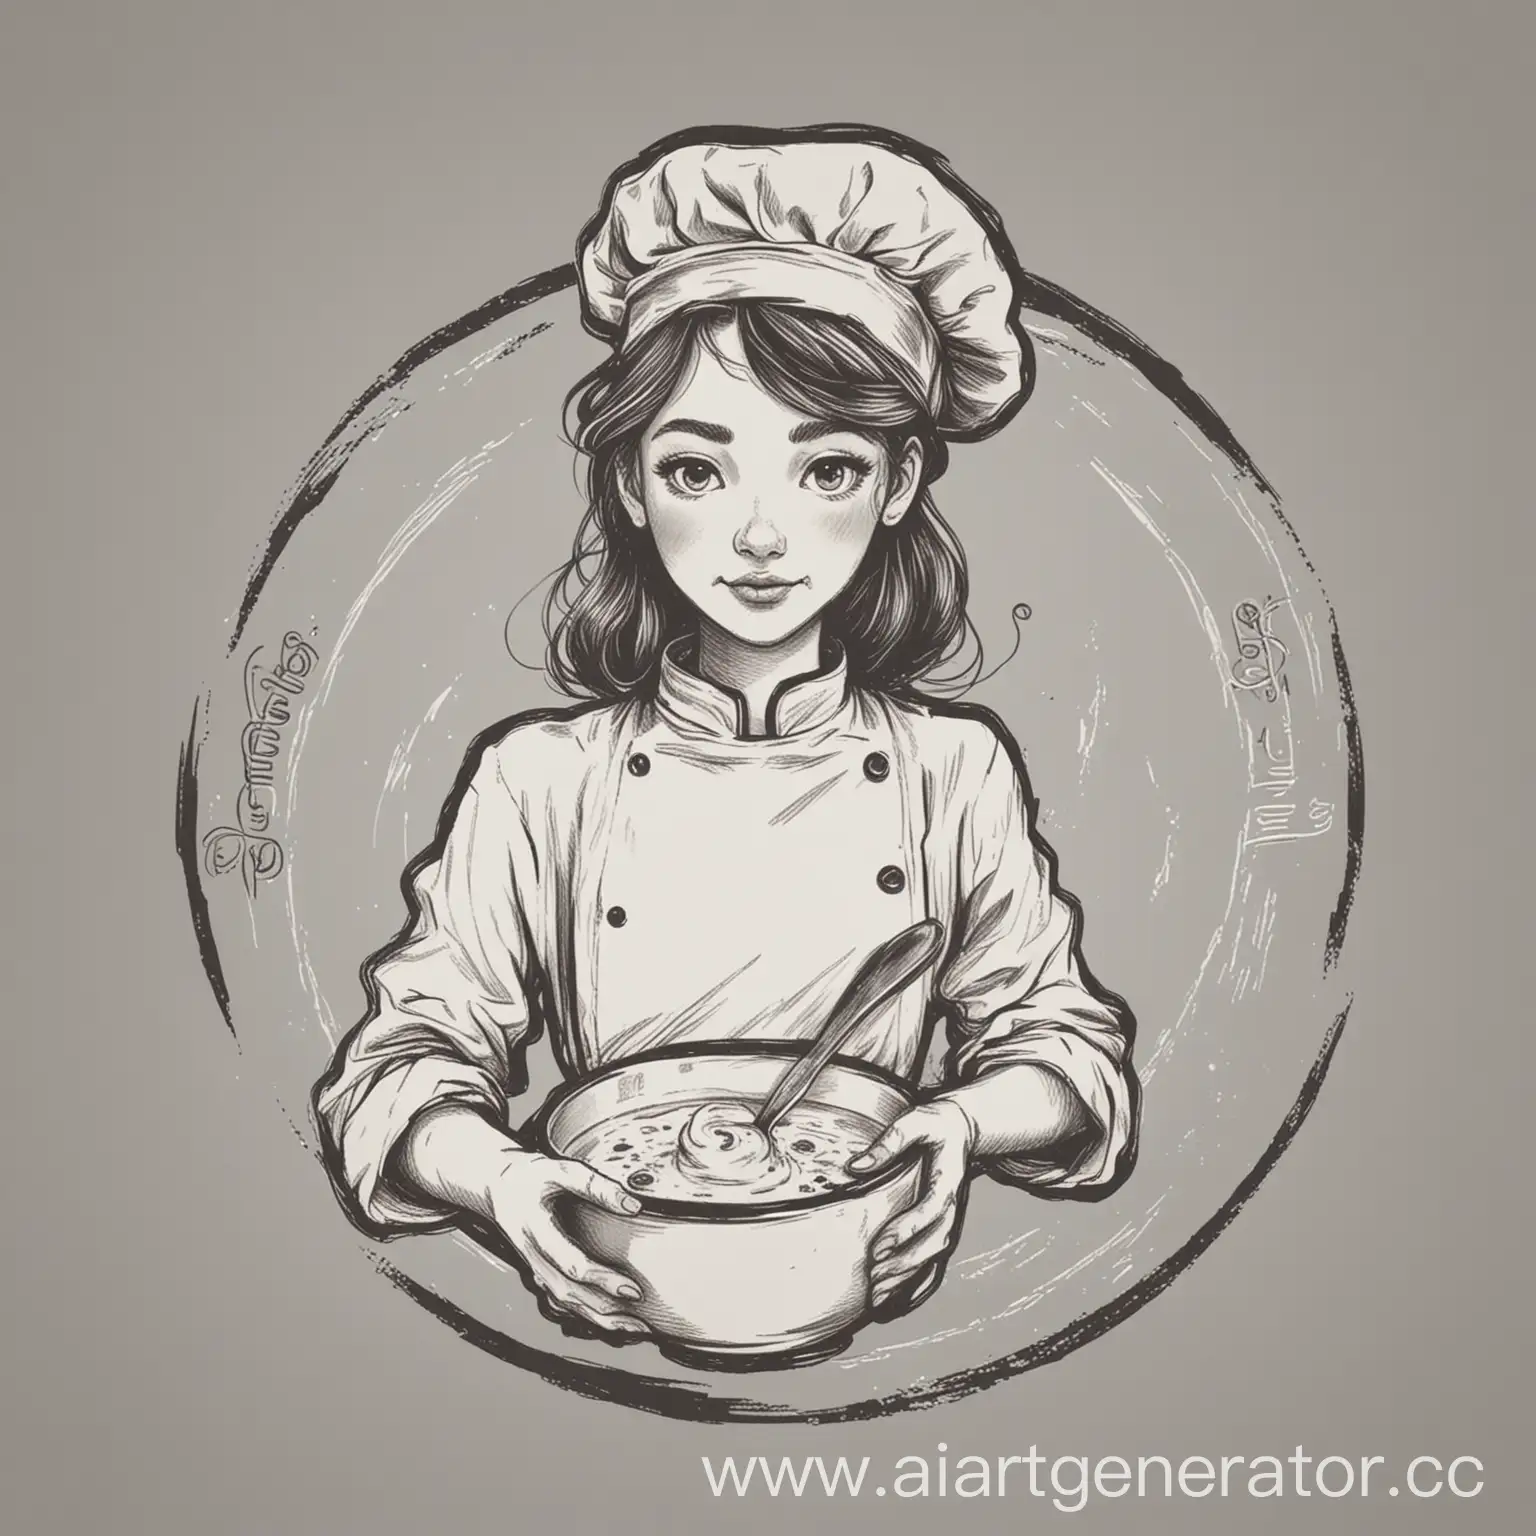 Monochrome-Line-Drawing-Girl-Chef-Holding-Soup-Bowl